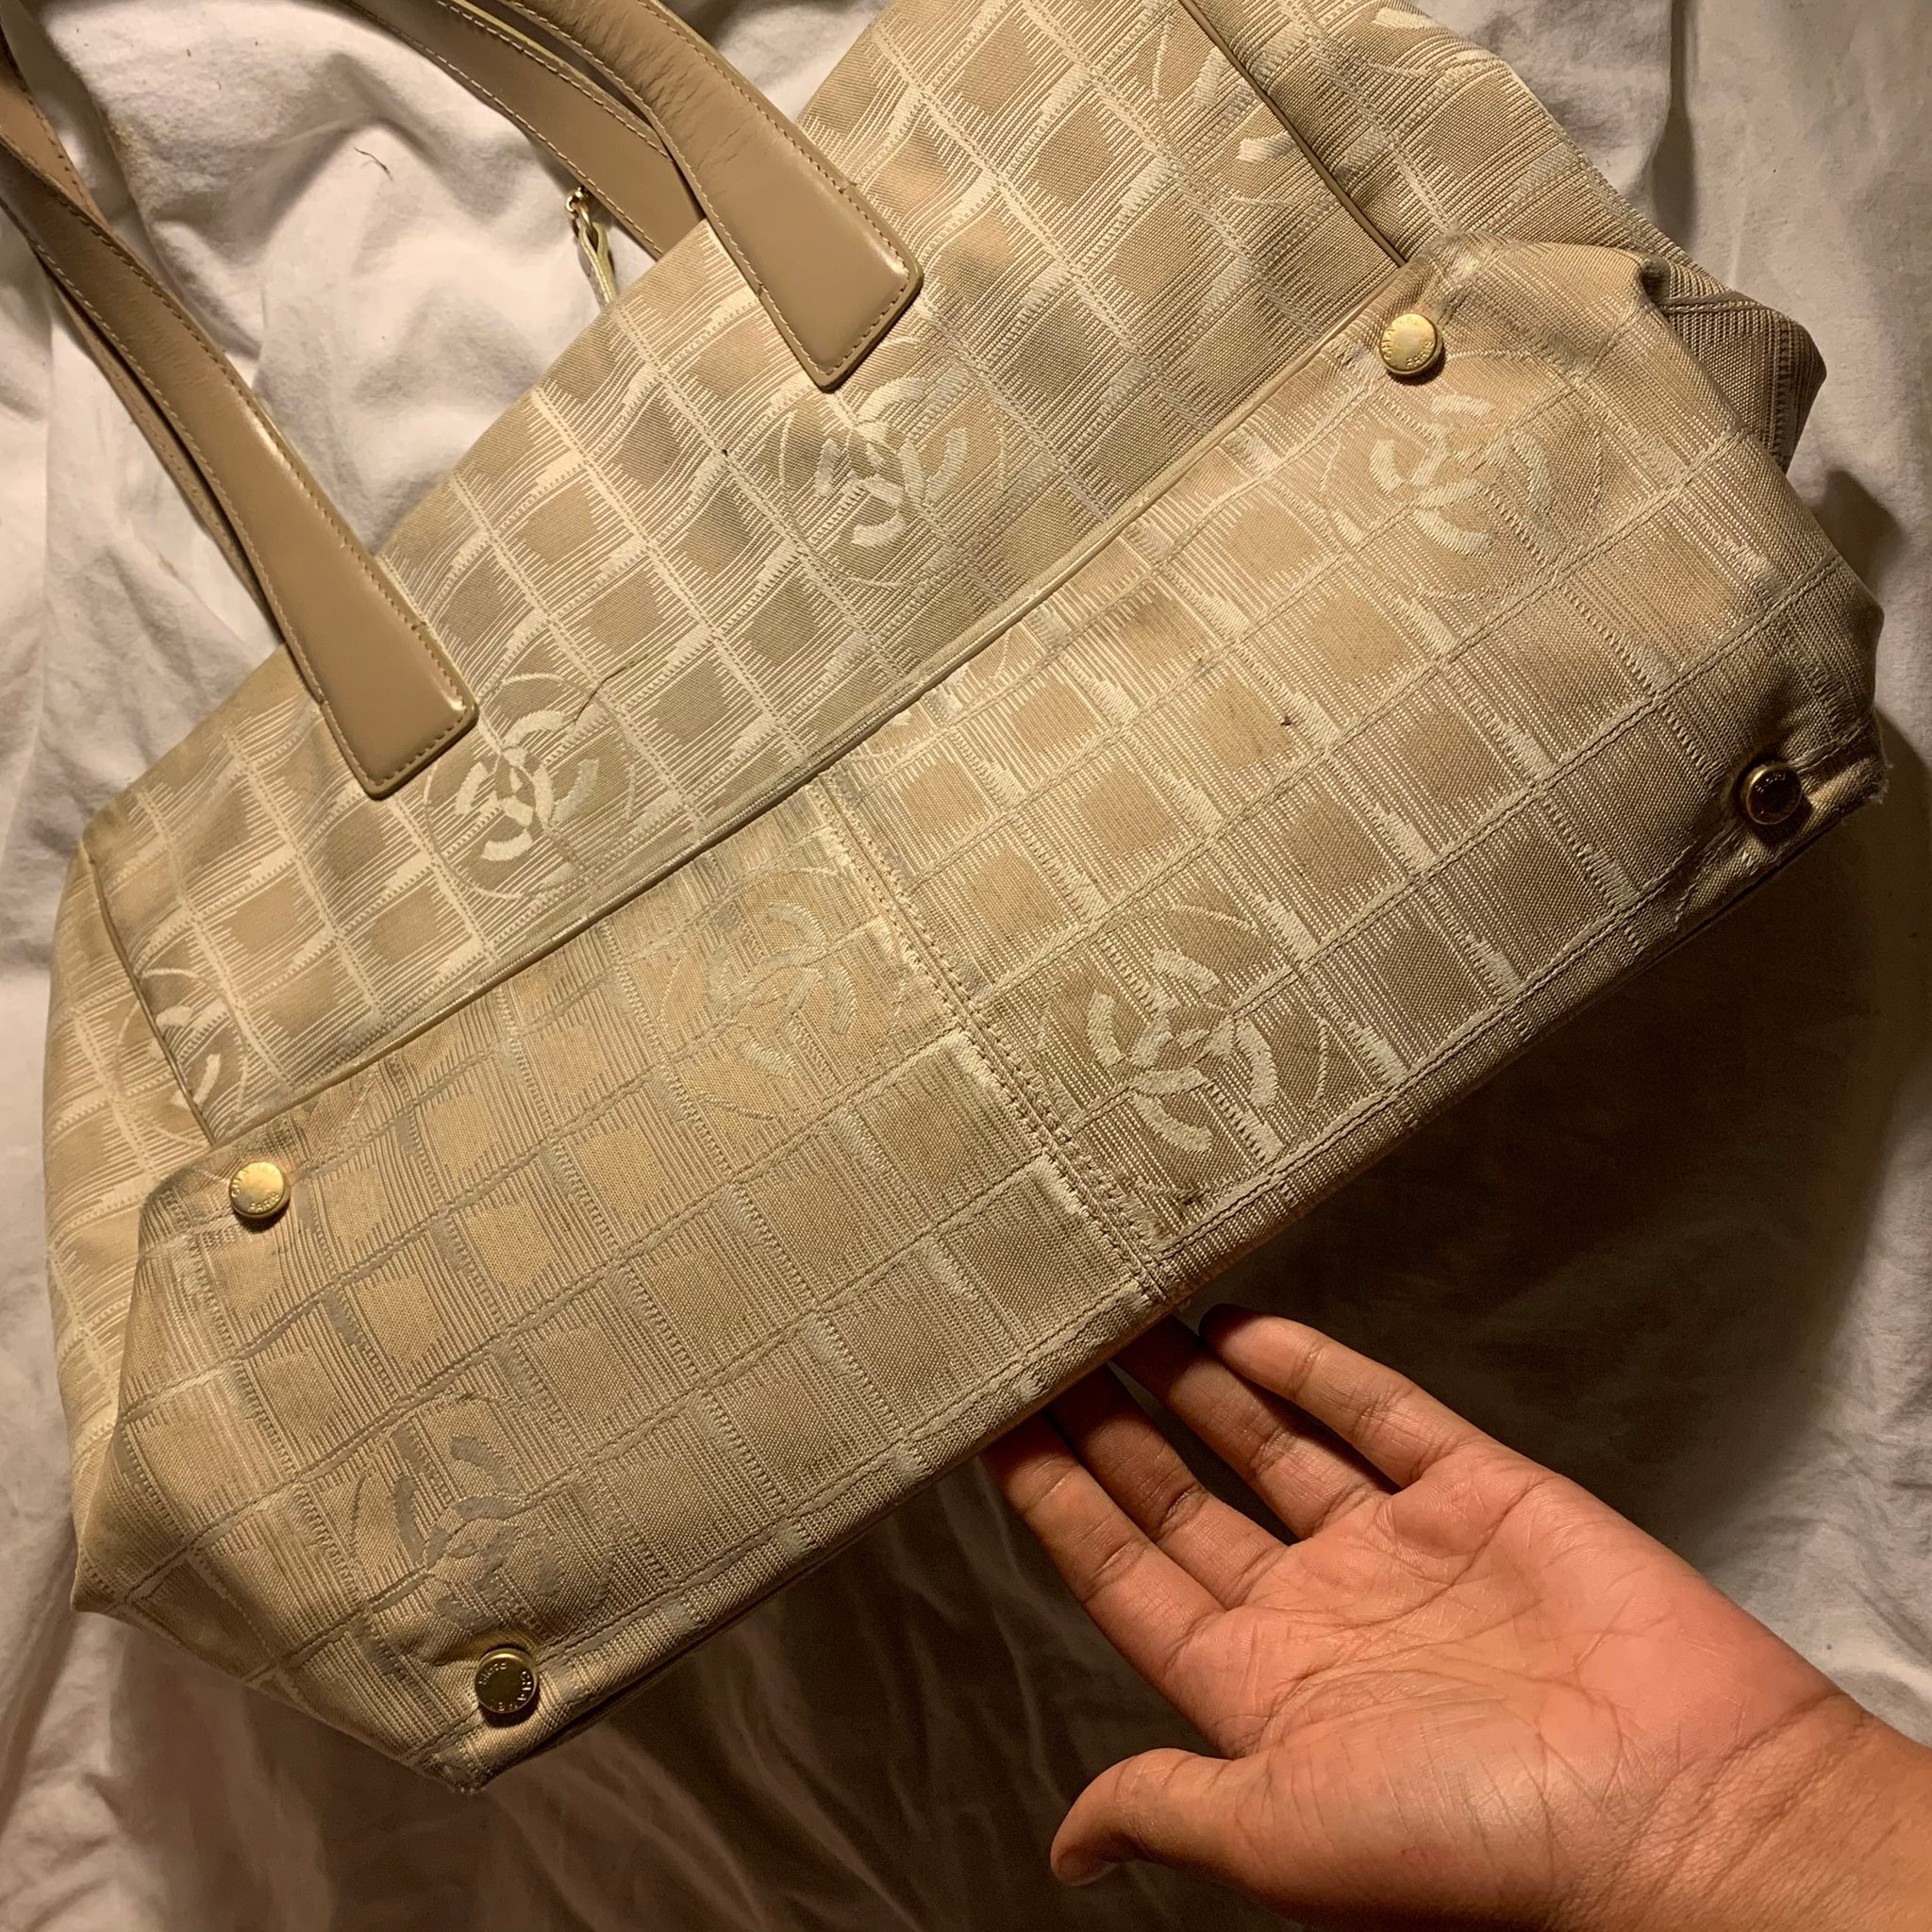 CHANEL, Bags, Authentic Chanel Nylon Travel Tote